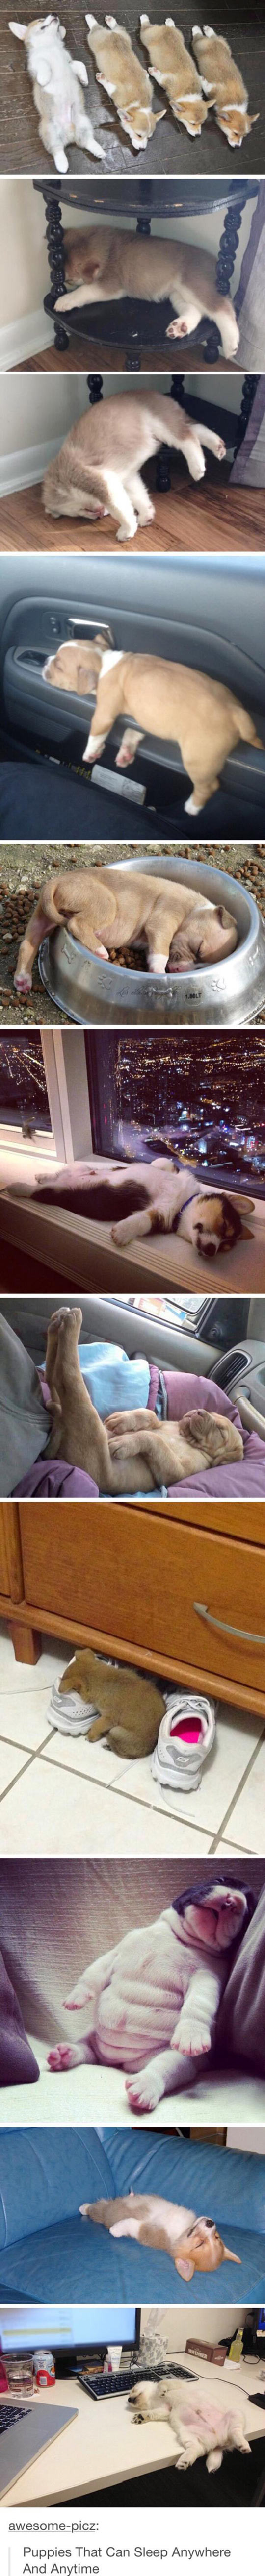 funny-dogs-sleeping-cute-puppies